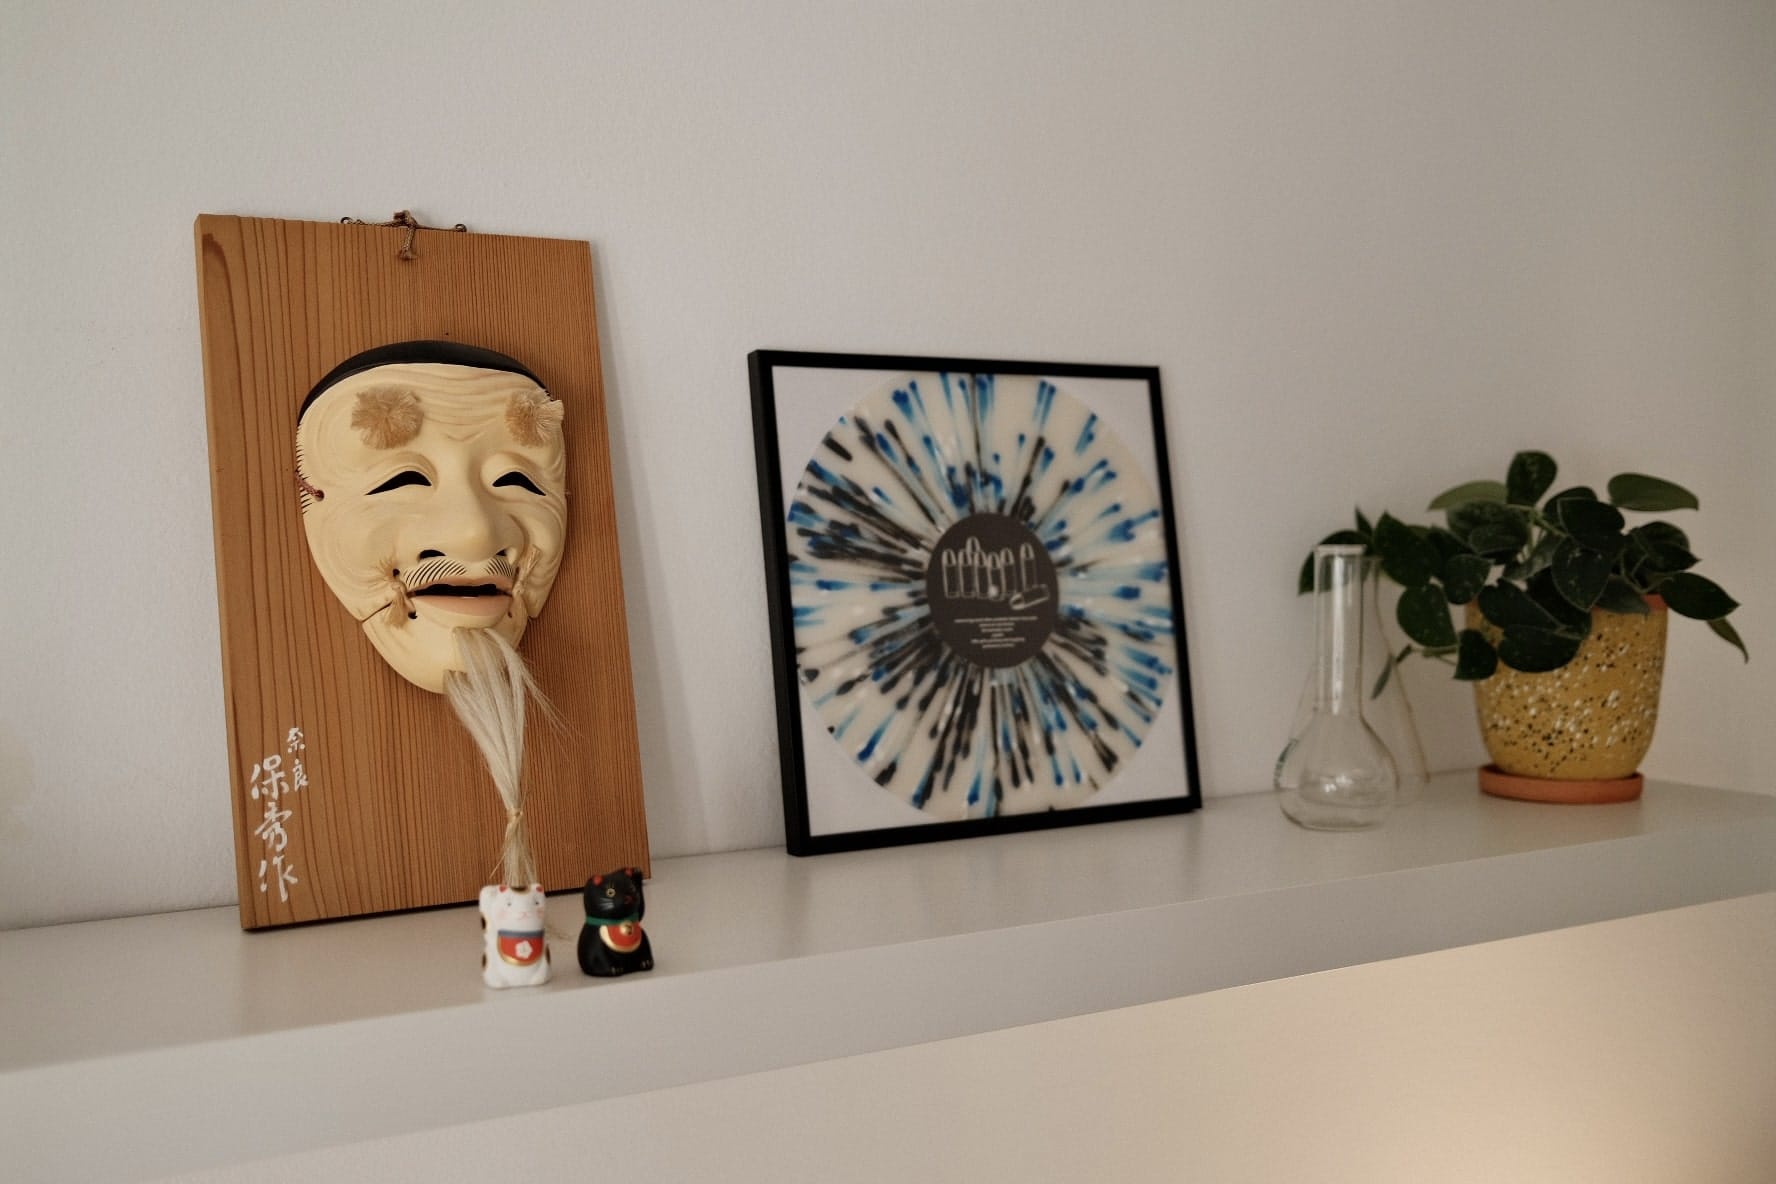 A shelf displaying a traditional wooden mask, two miniature figurines, a framed vinyl record design, and a potted plant in a speckled pot